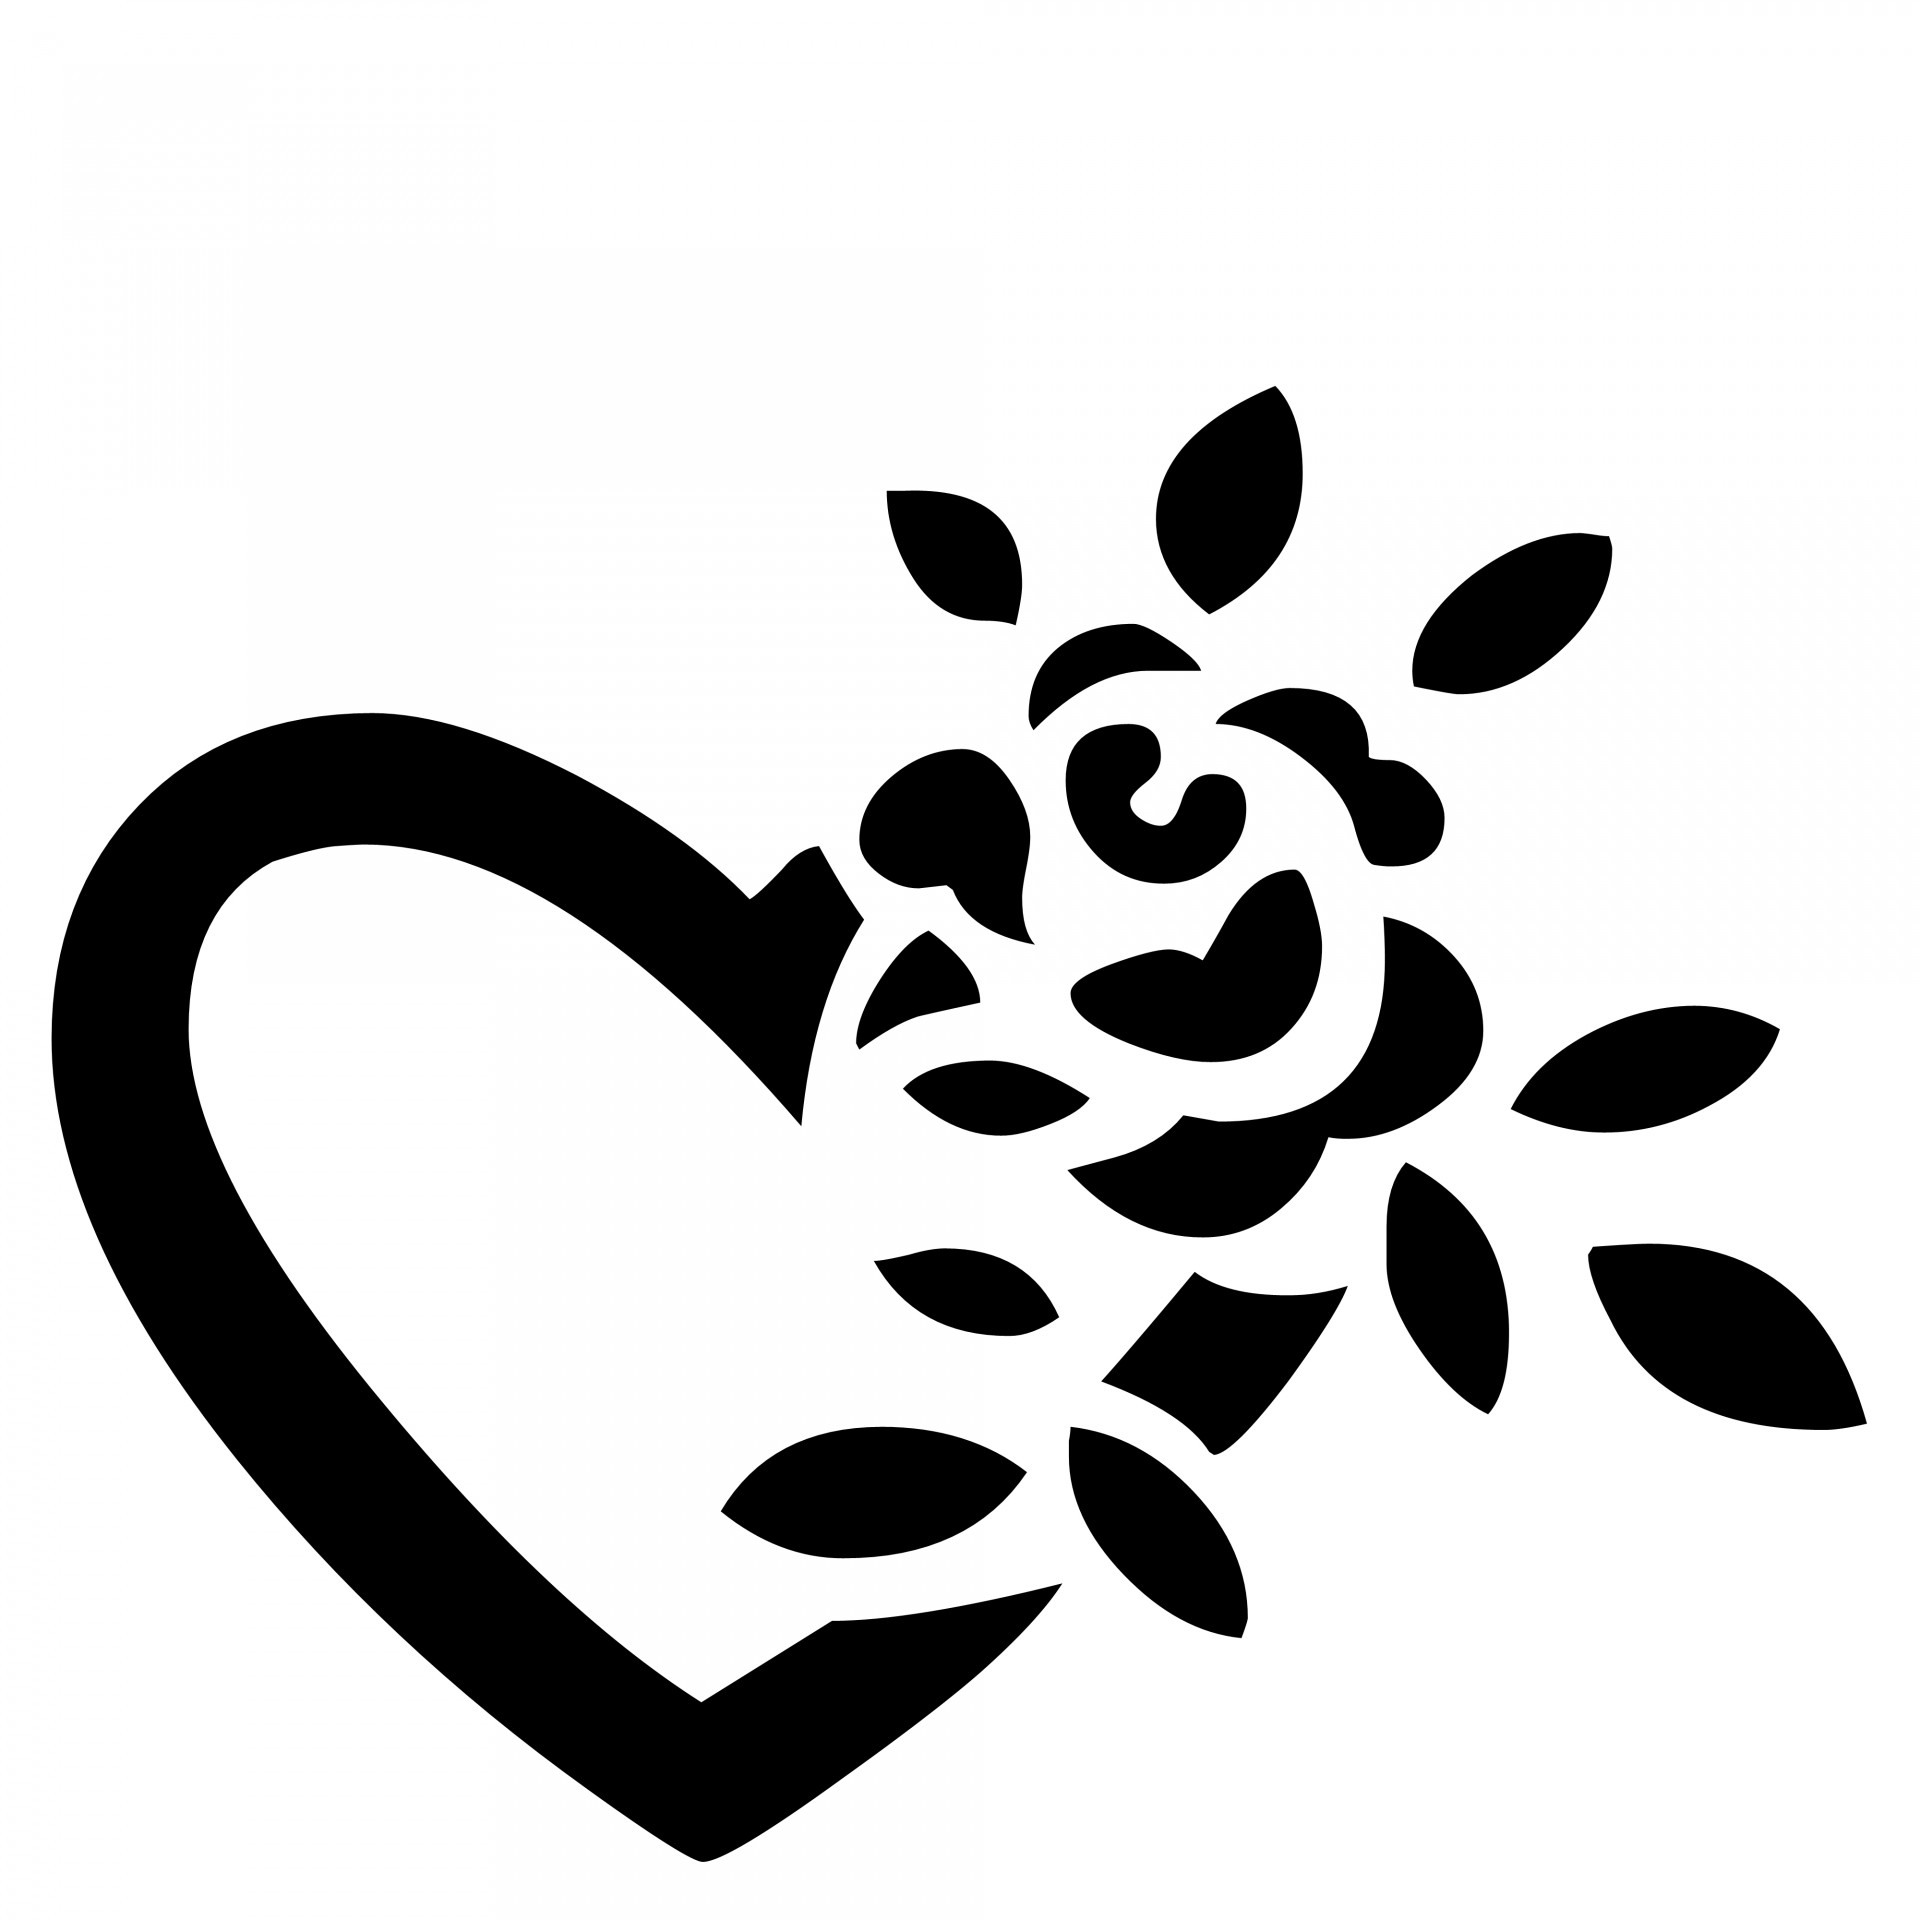 Download free photo of Black,outline,heart,rose,white - from 